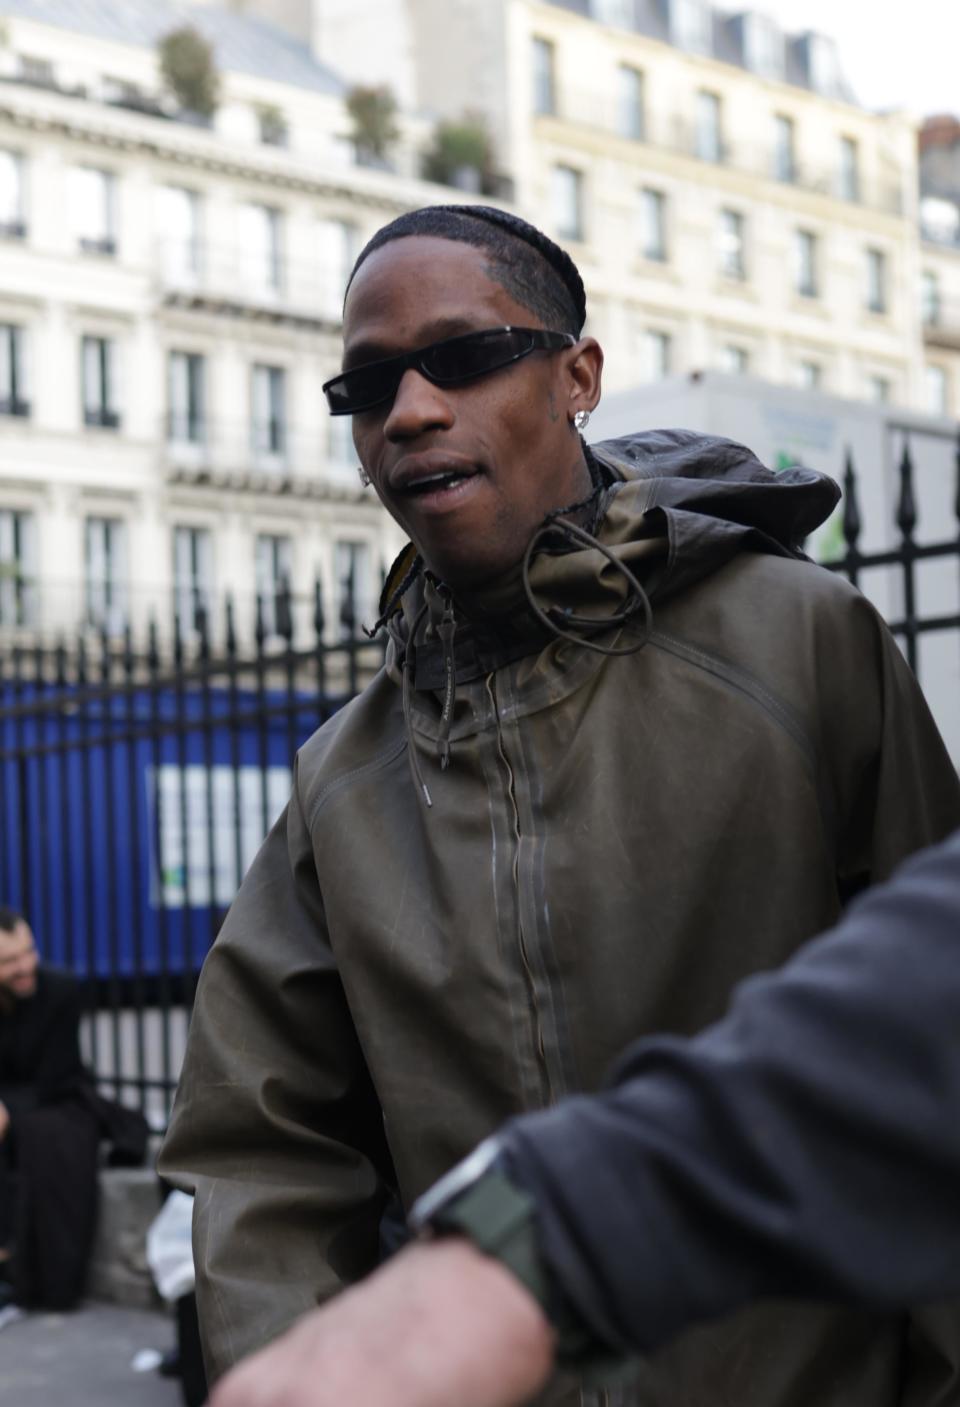 Travis Scott seen outdoors wearing dark sunglasses and a hooded jacket. Urban background with buildings and a fenced area